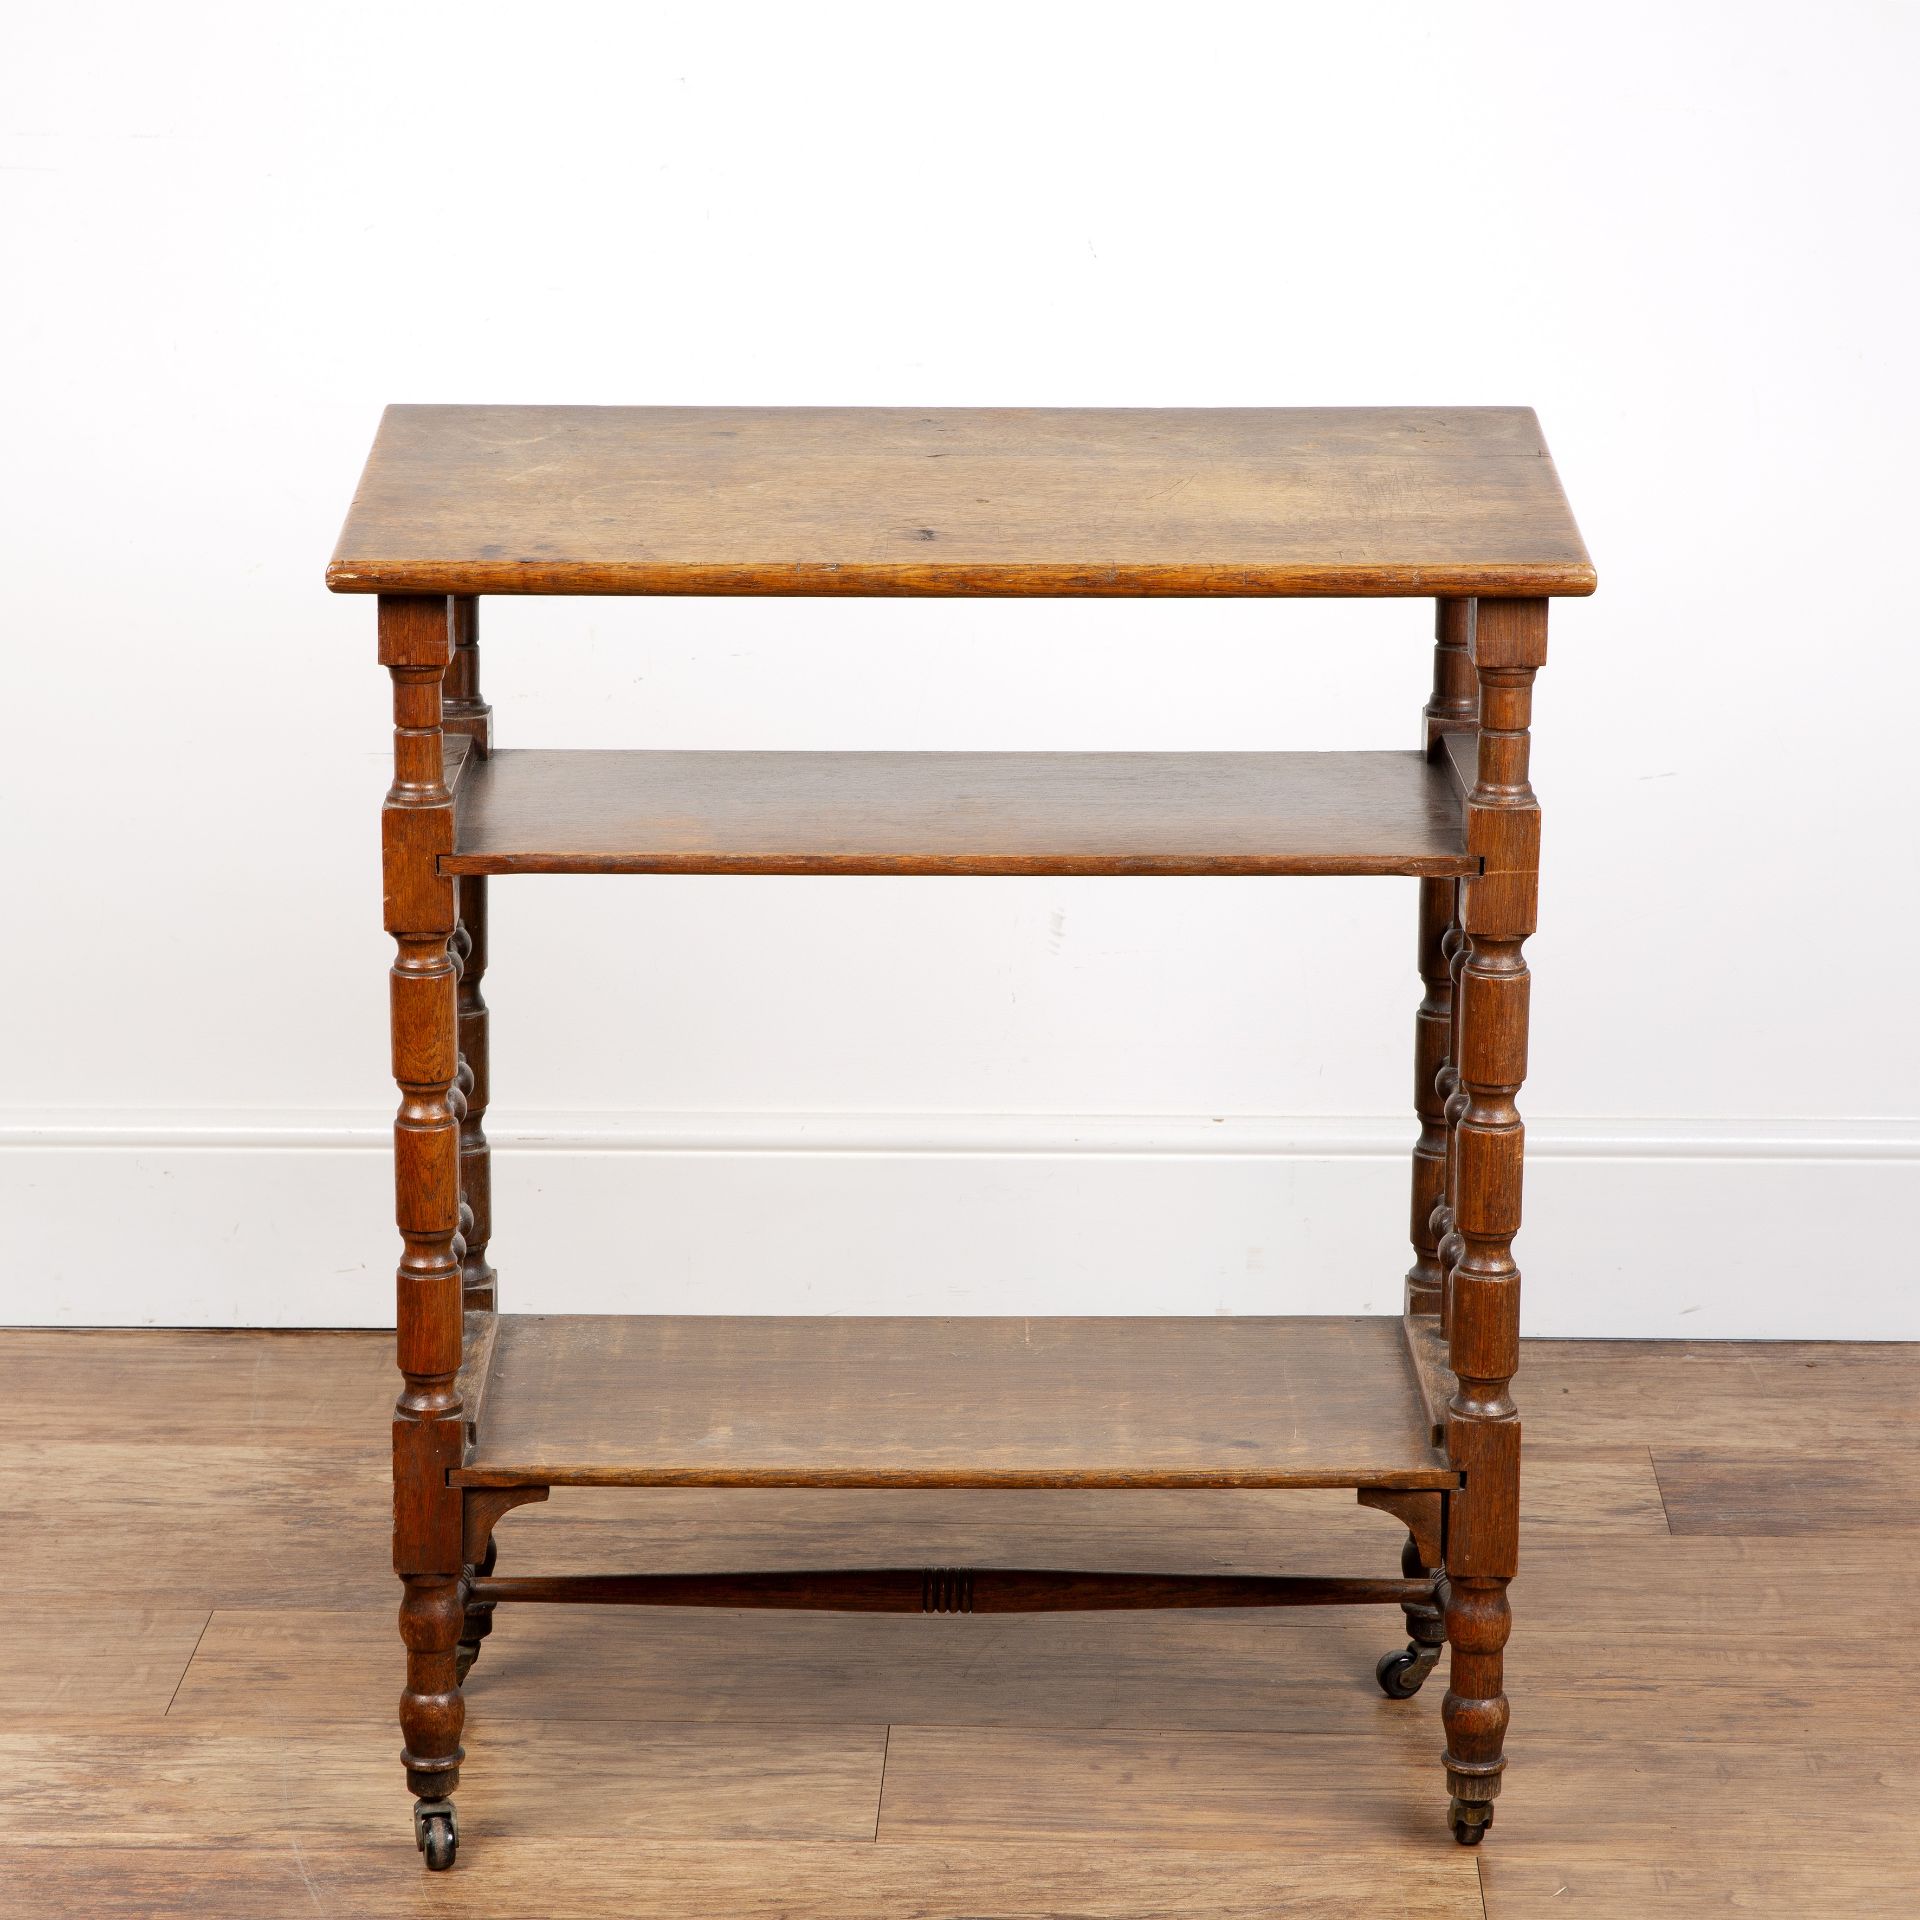 Leonard Wyburd (1865-1958) for Liberty & Co oak bookstand or reading table, with lattice side - Image 4 of 5